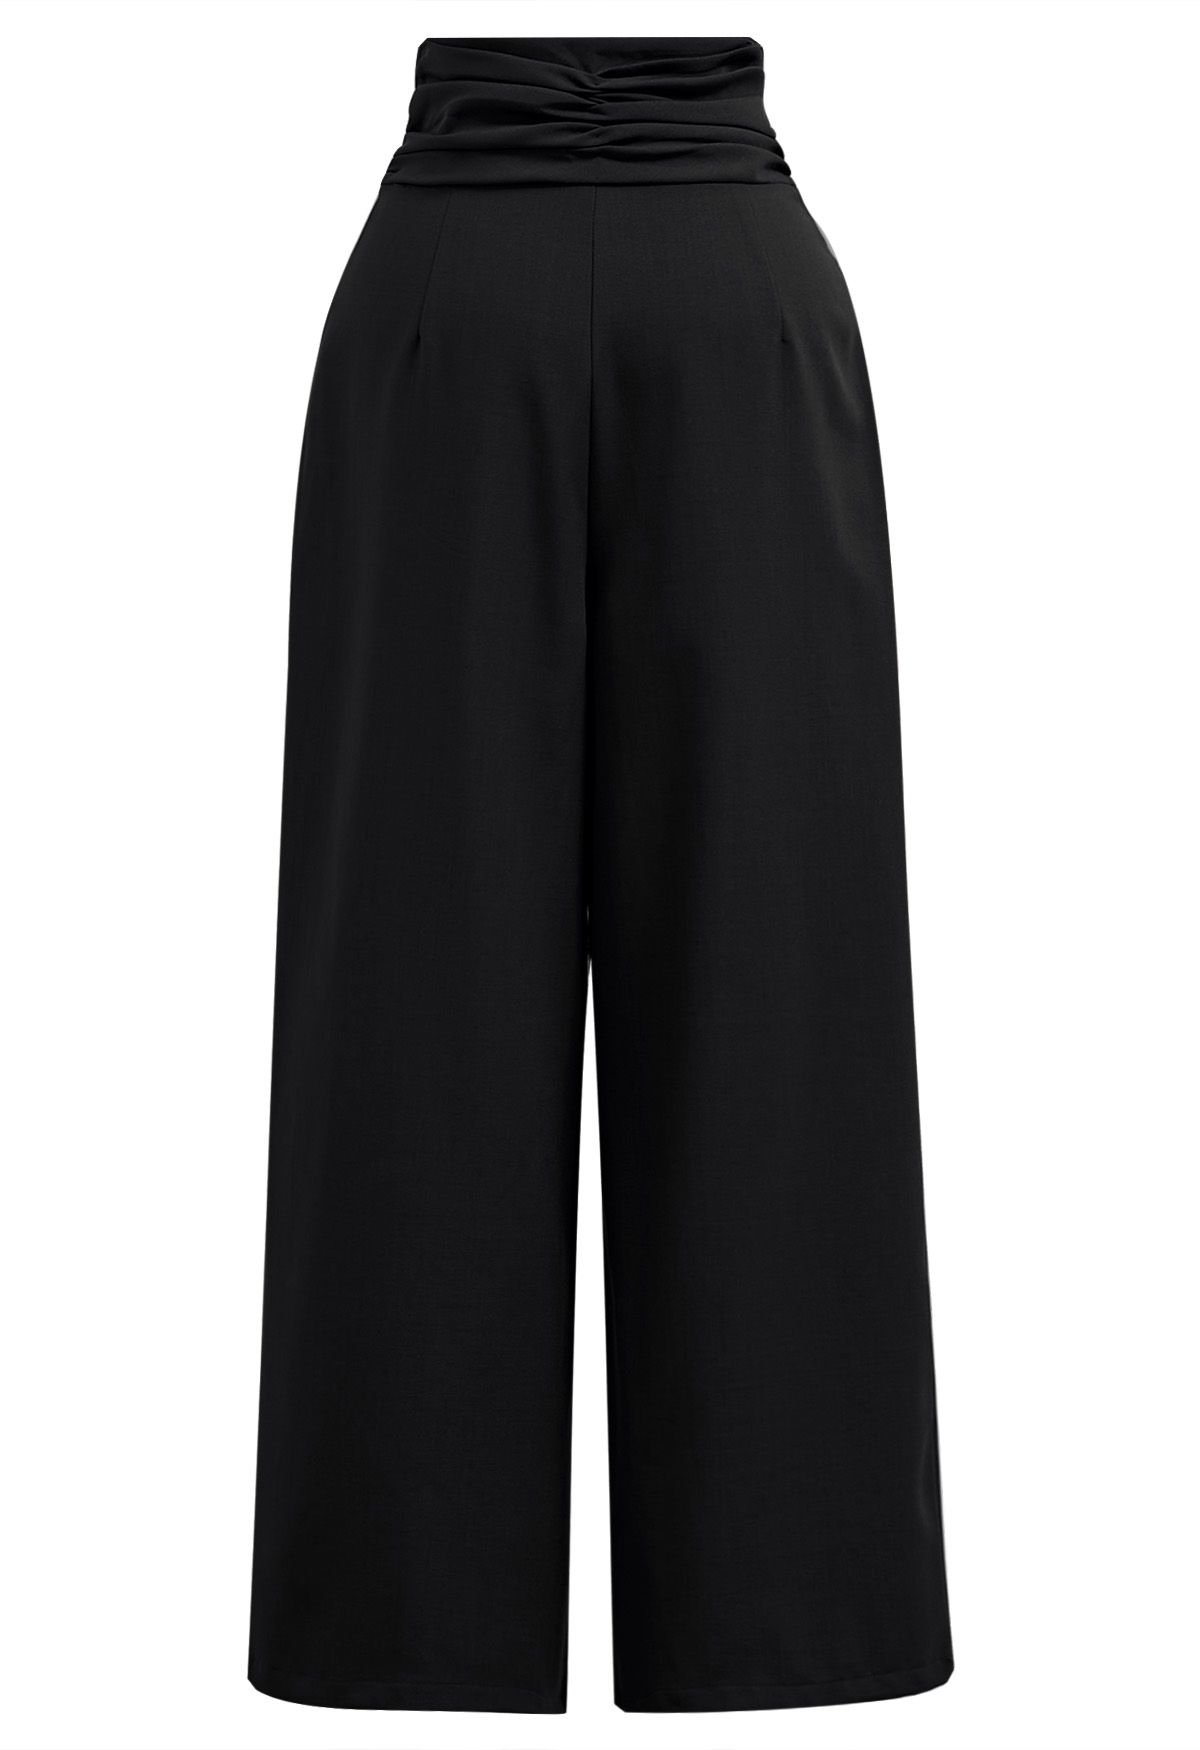 Ruched High Waist Pleated Wide-Leg Pants in Black - Retro, Indie and ...